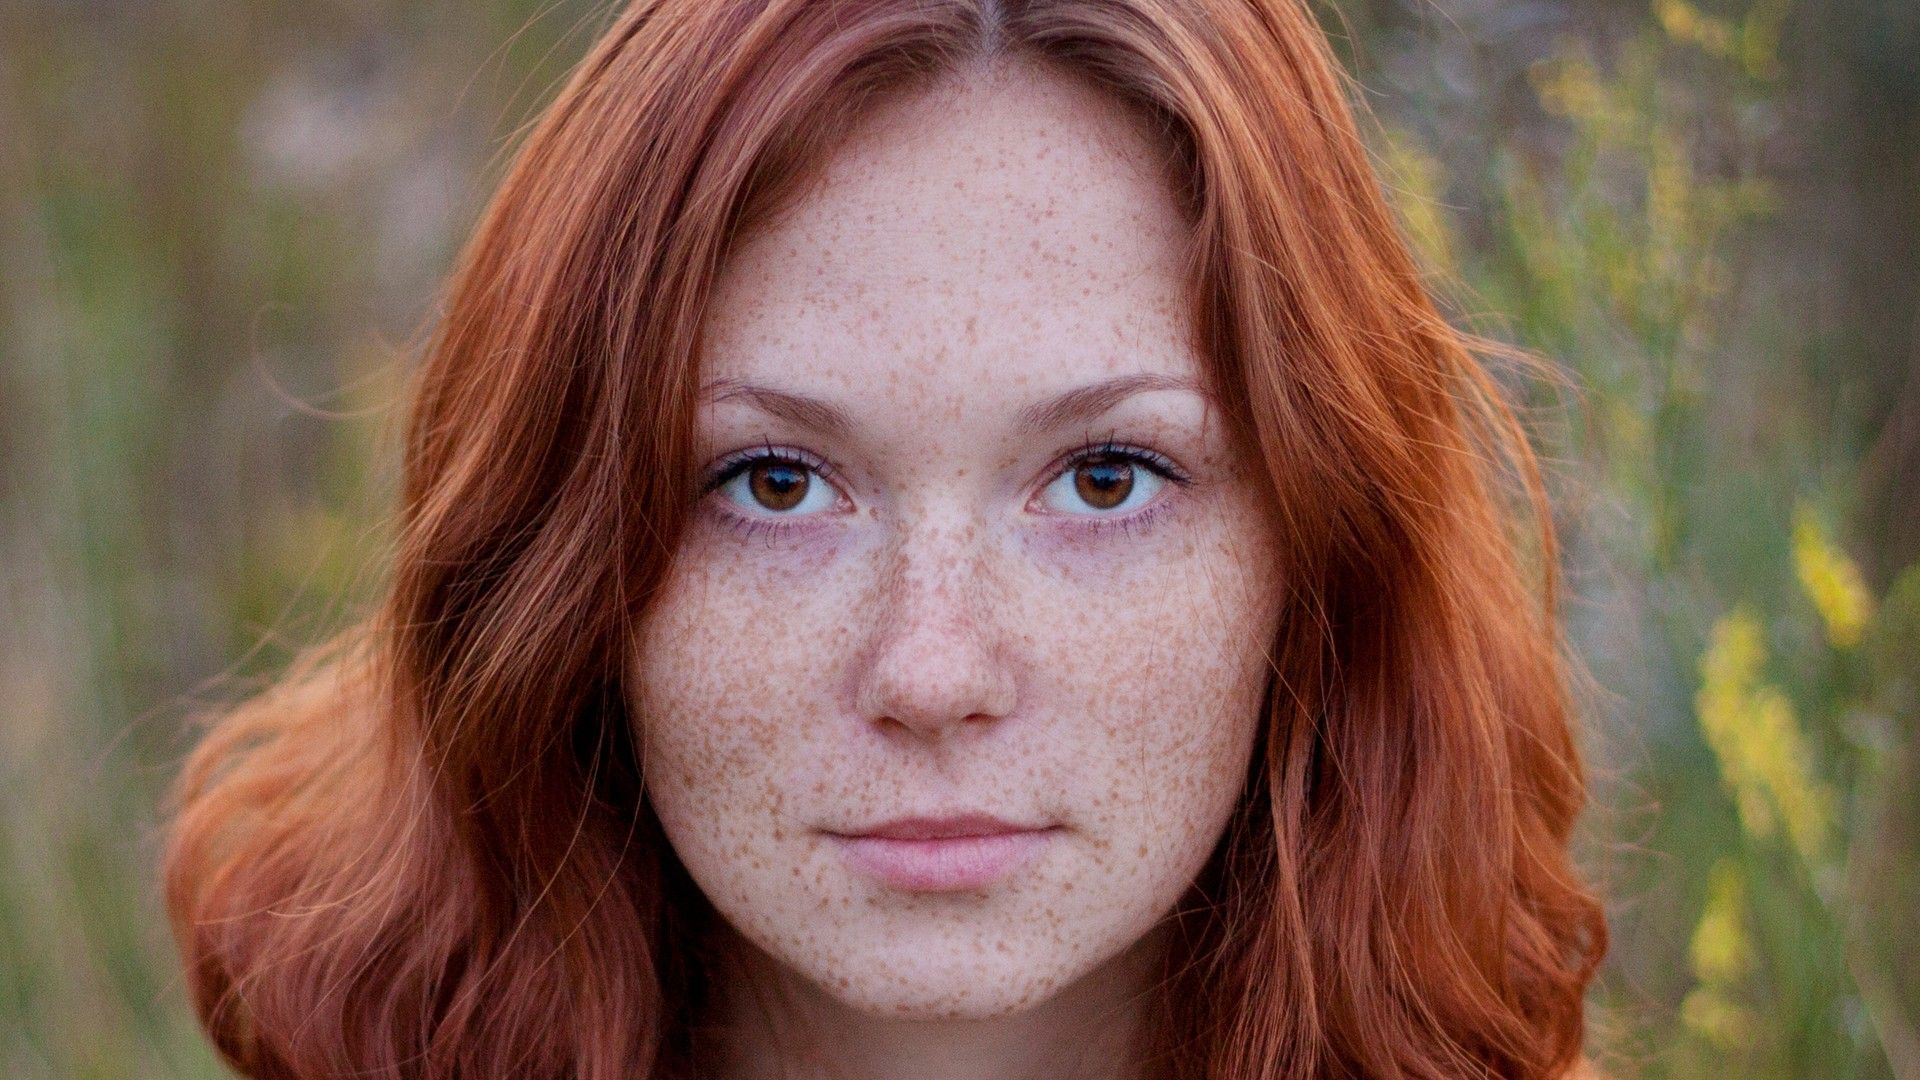 Redheaded woman with brown eyes [1920x1080] | wallpapers | Pinterest ...